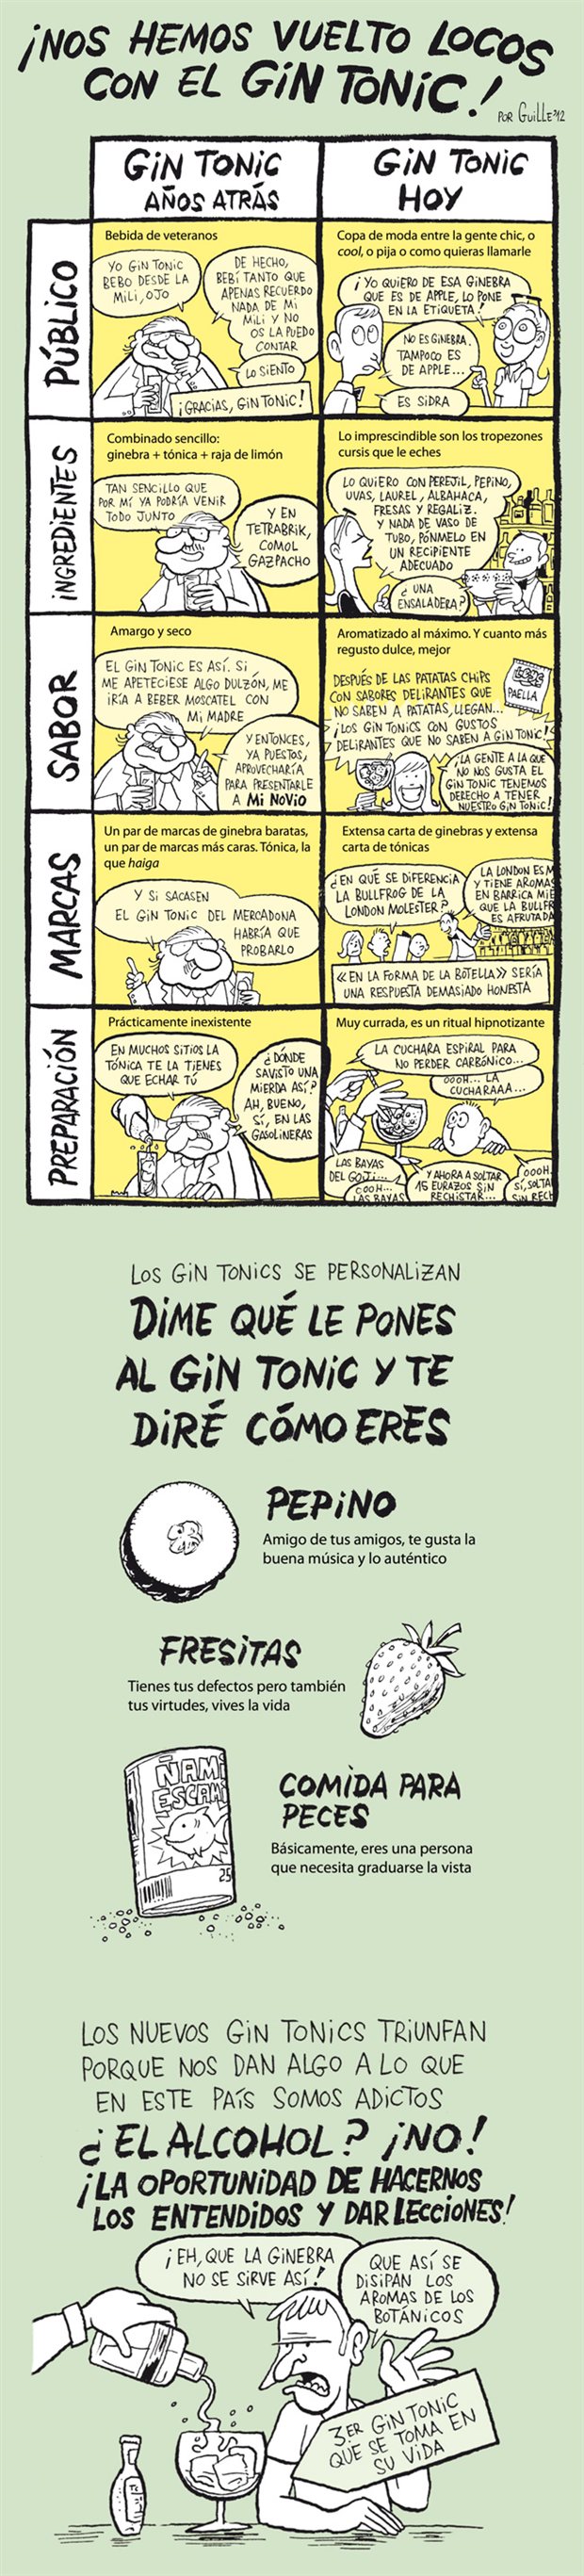 EBDLN-gintonic-guille-2